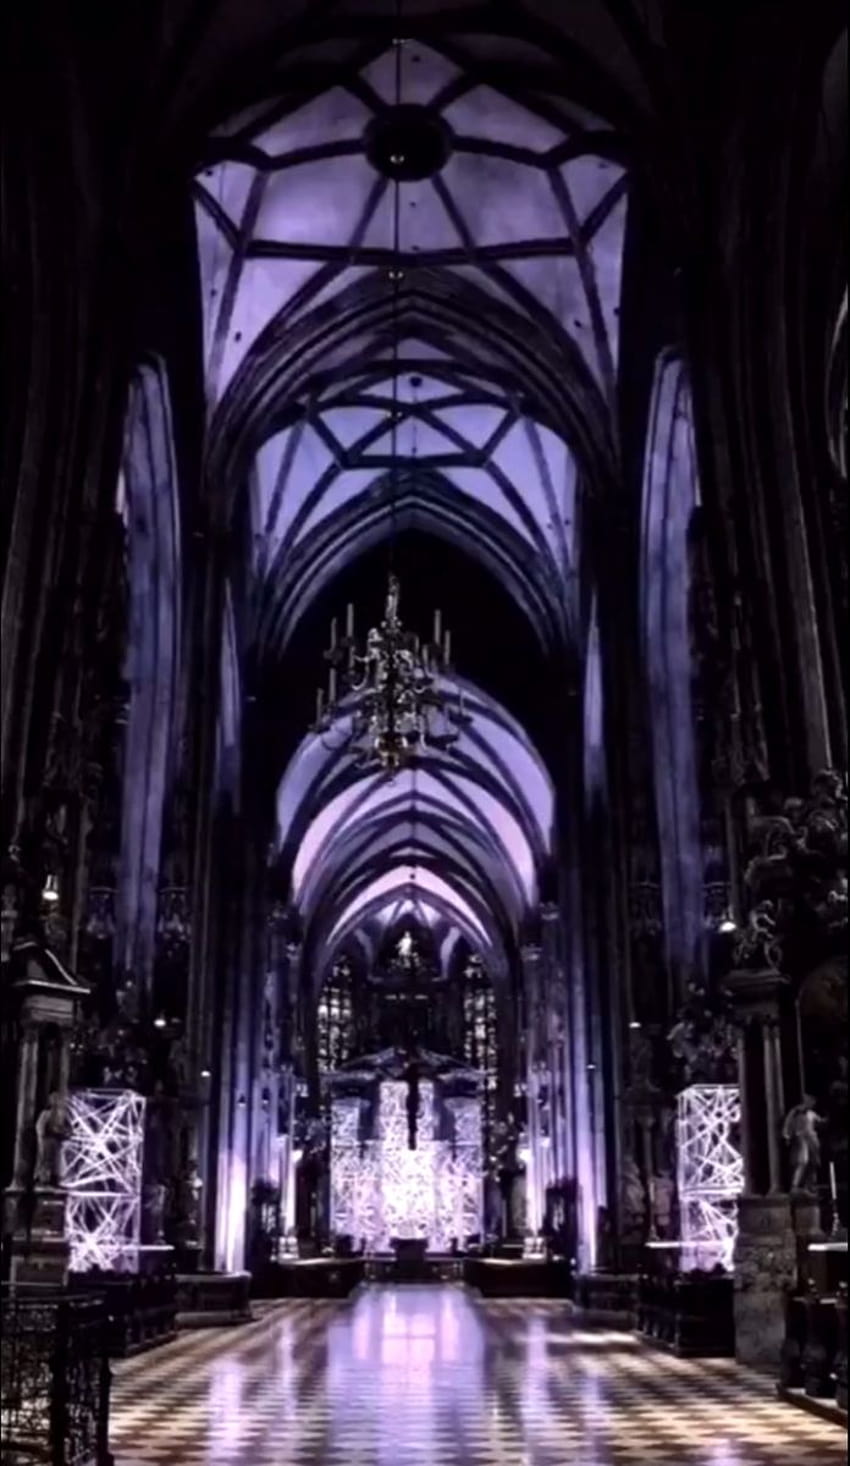 The inside of a cathedral with purple lighting. - Royalcore